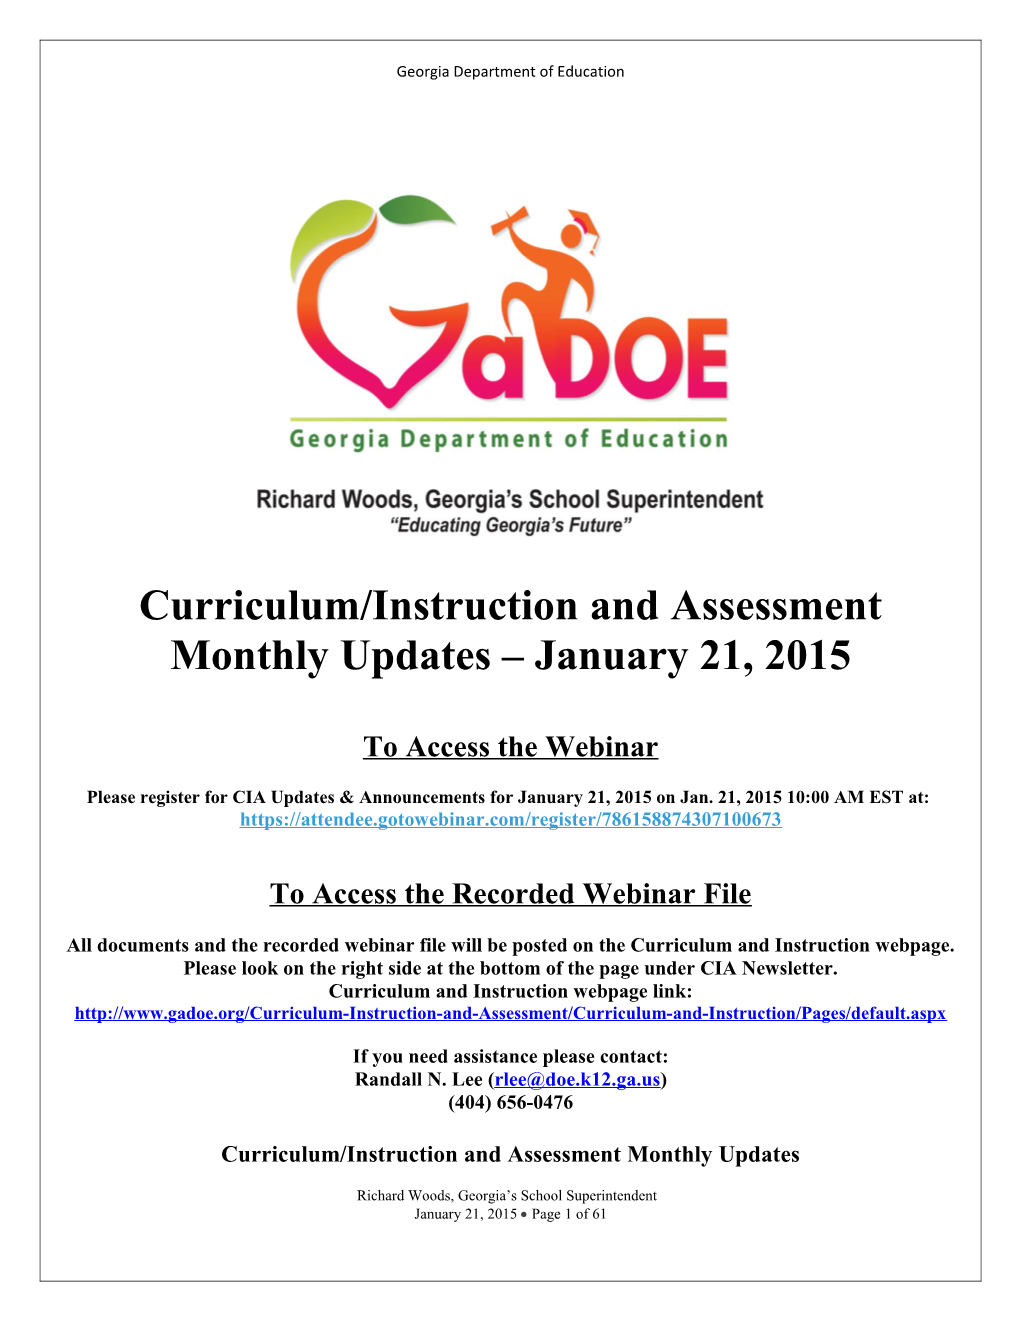 Curriculum/Instruction and Assessment Monthly Updates January 21, 2015